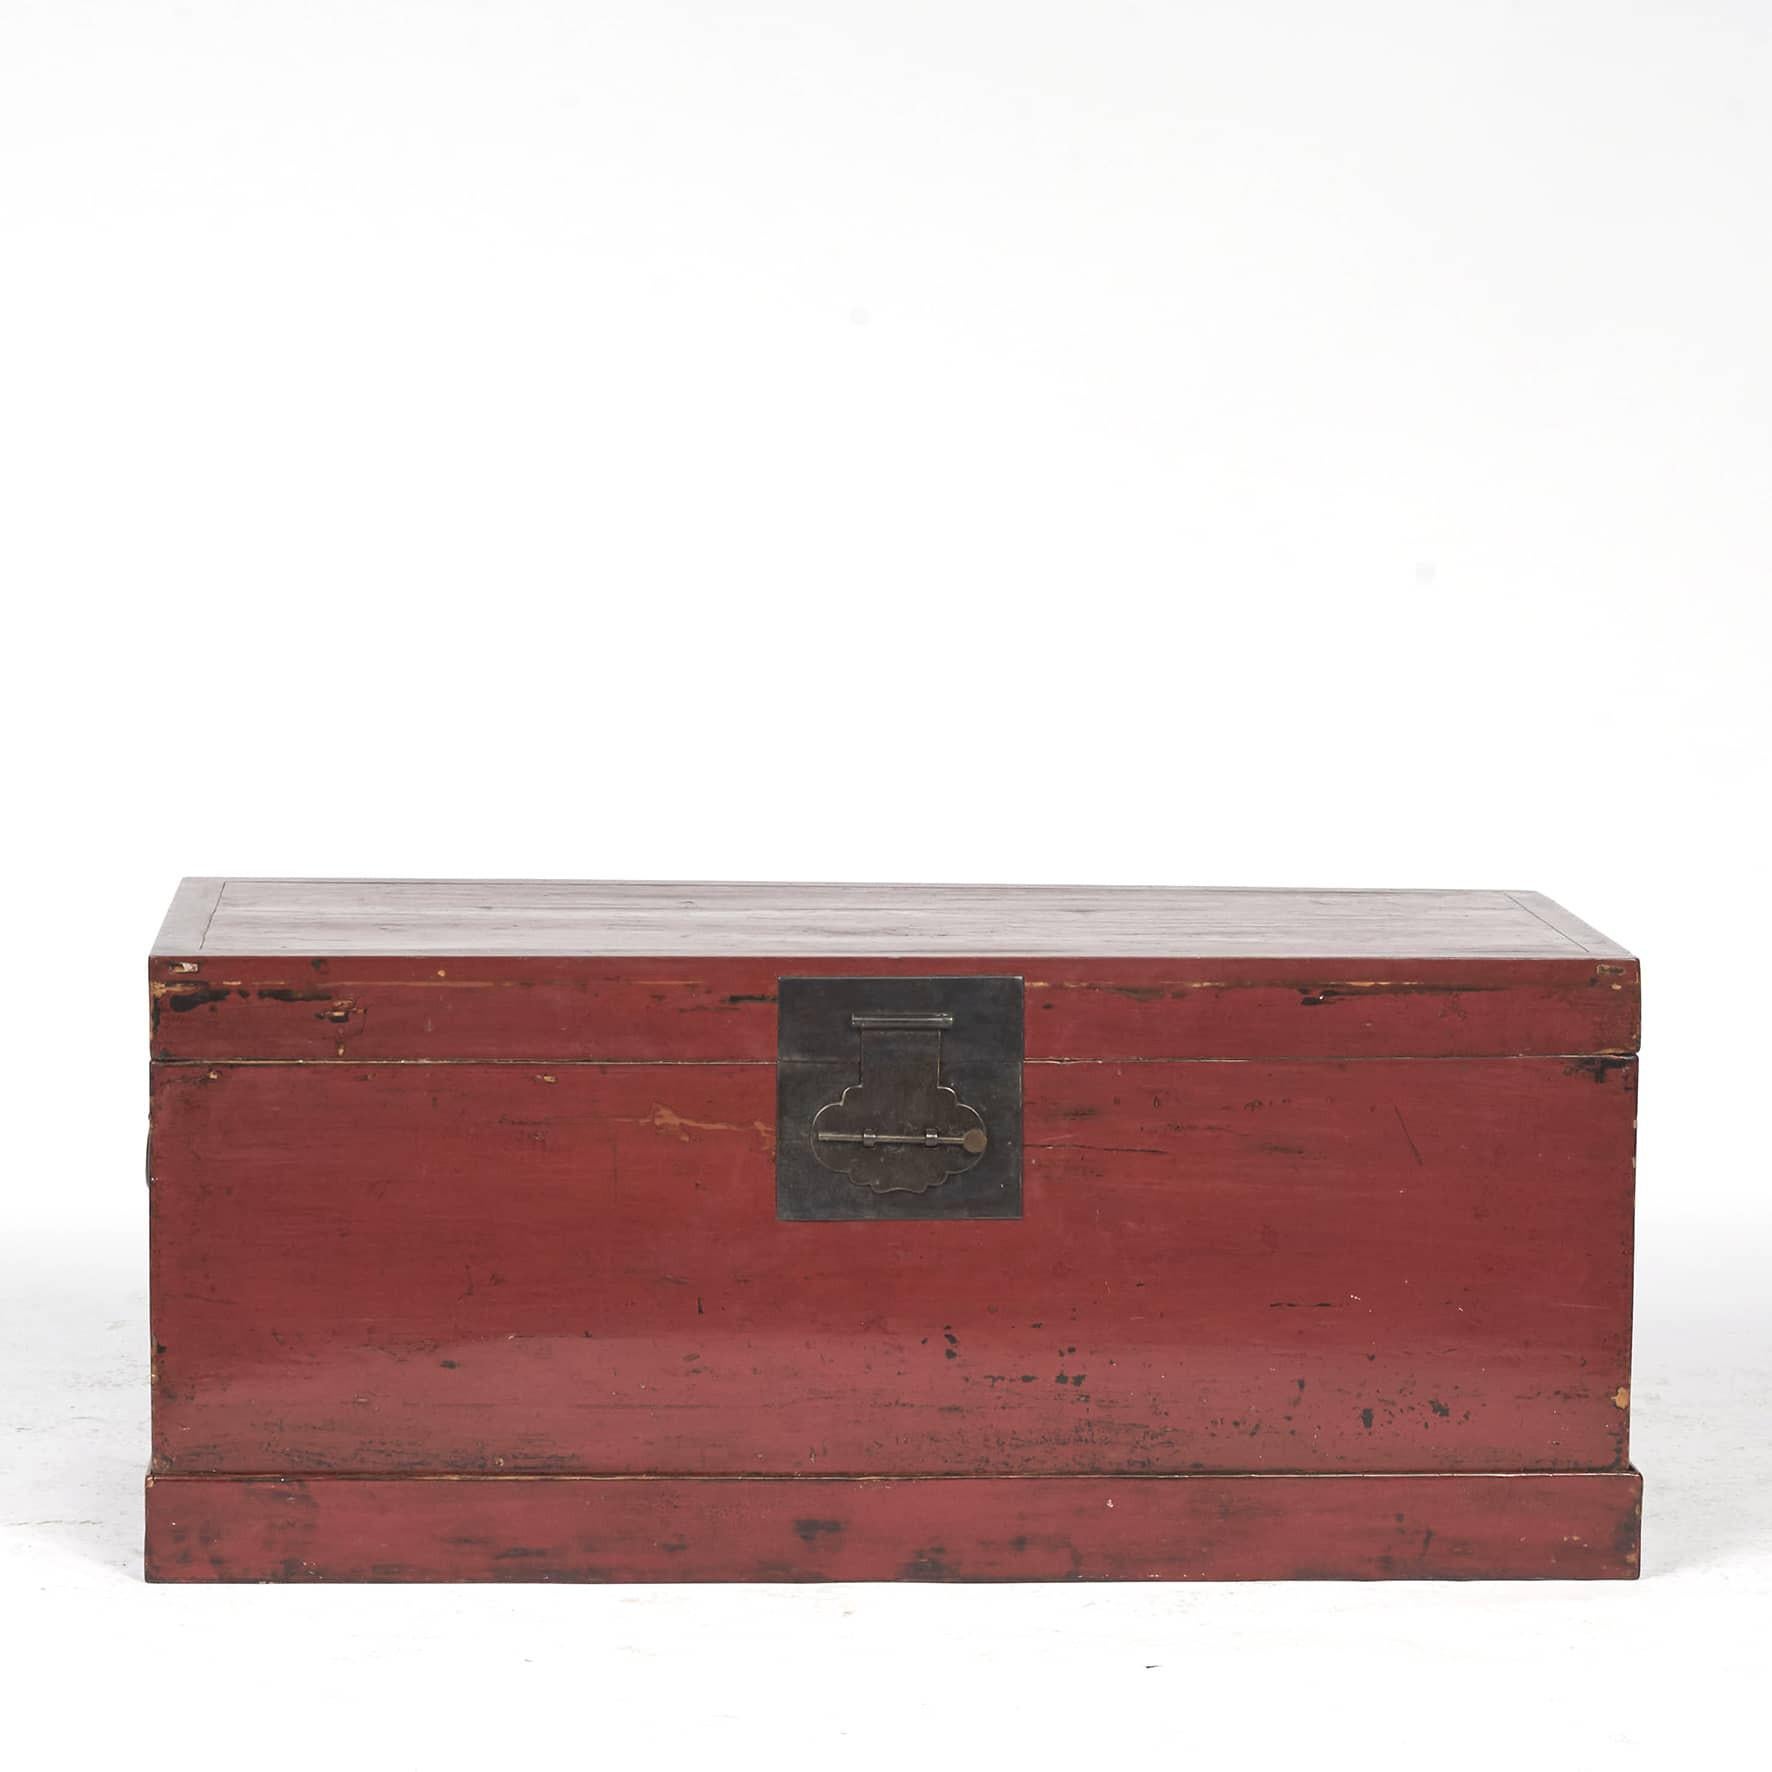 A Chinese 19th century blanket chest with original red lacquer that displays beautiful patina achieved over time.
Raised on a plinth.
Can be used as coffee table.
Jiangsu Province c. 1850-1870.